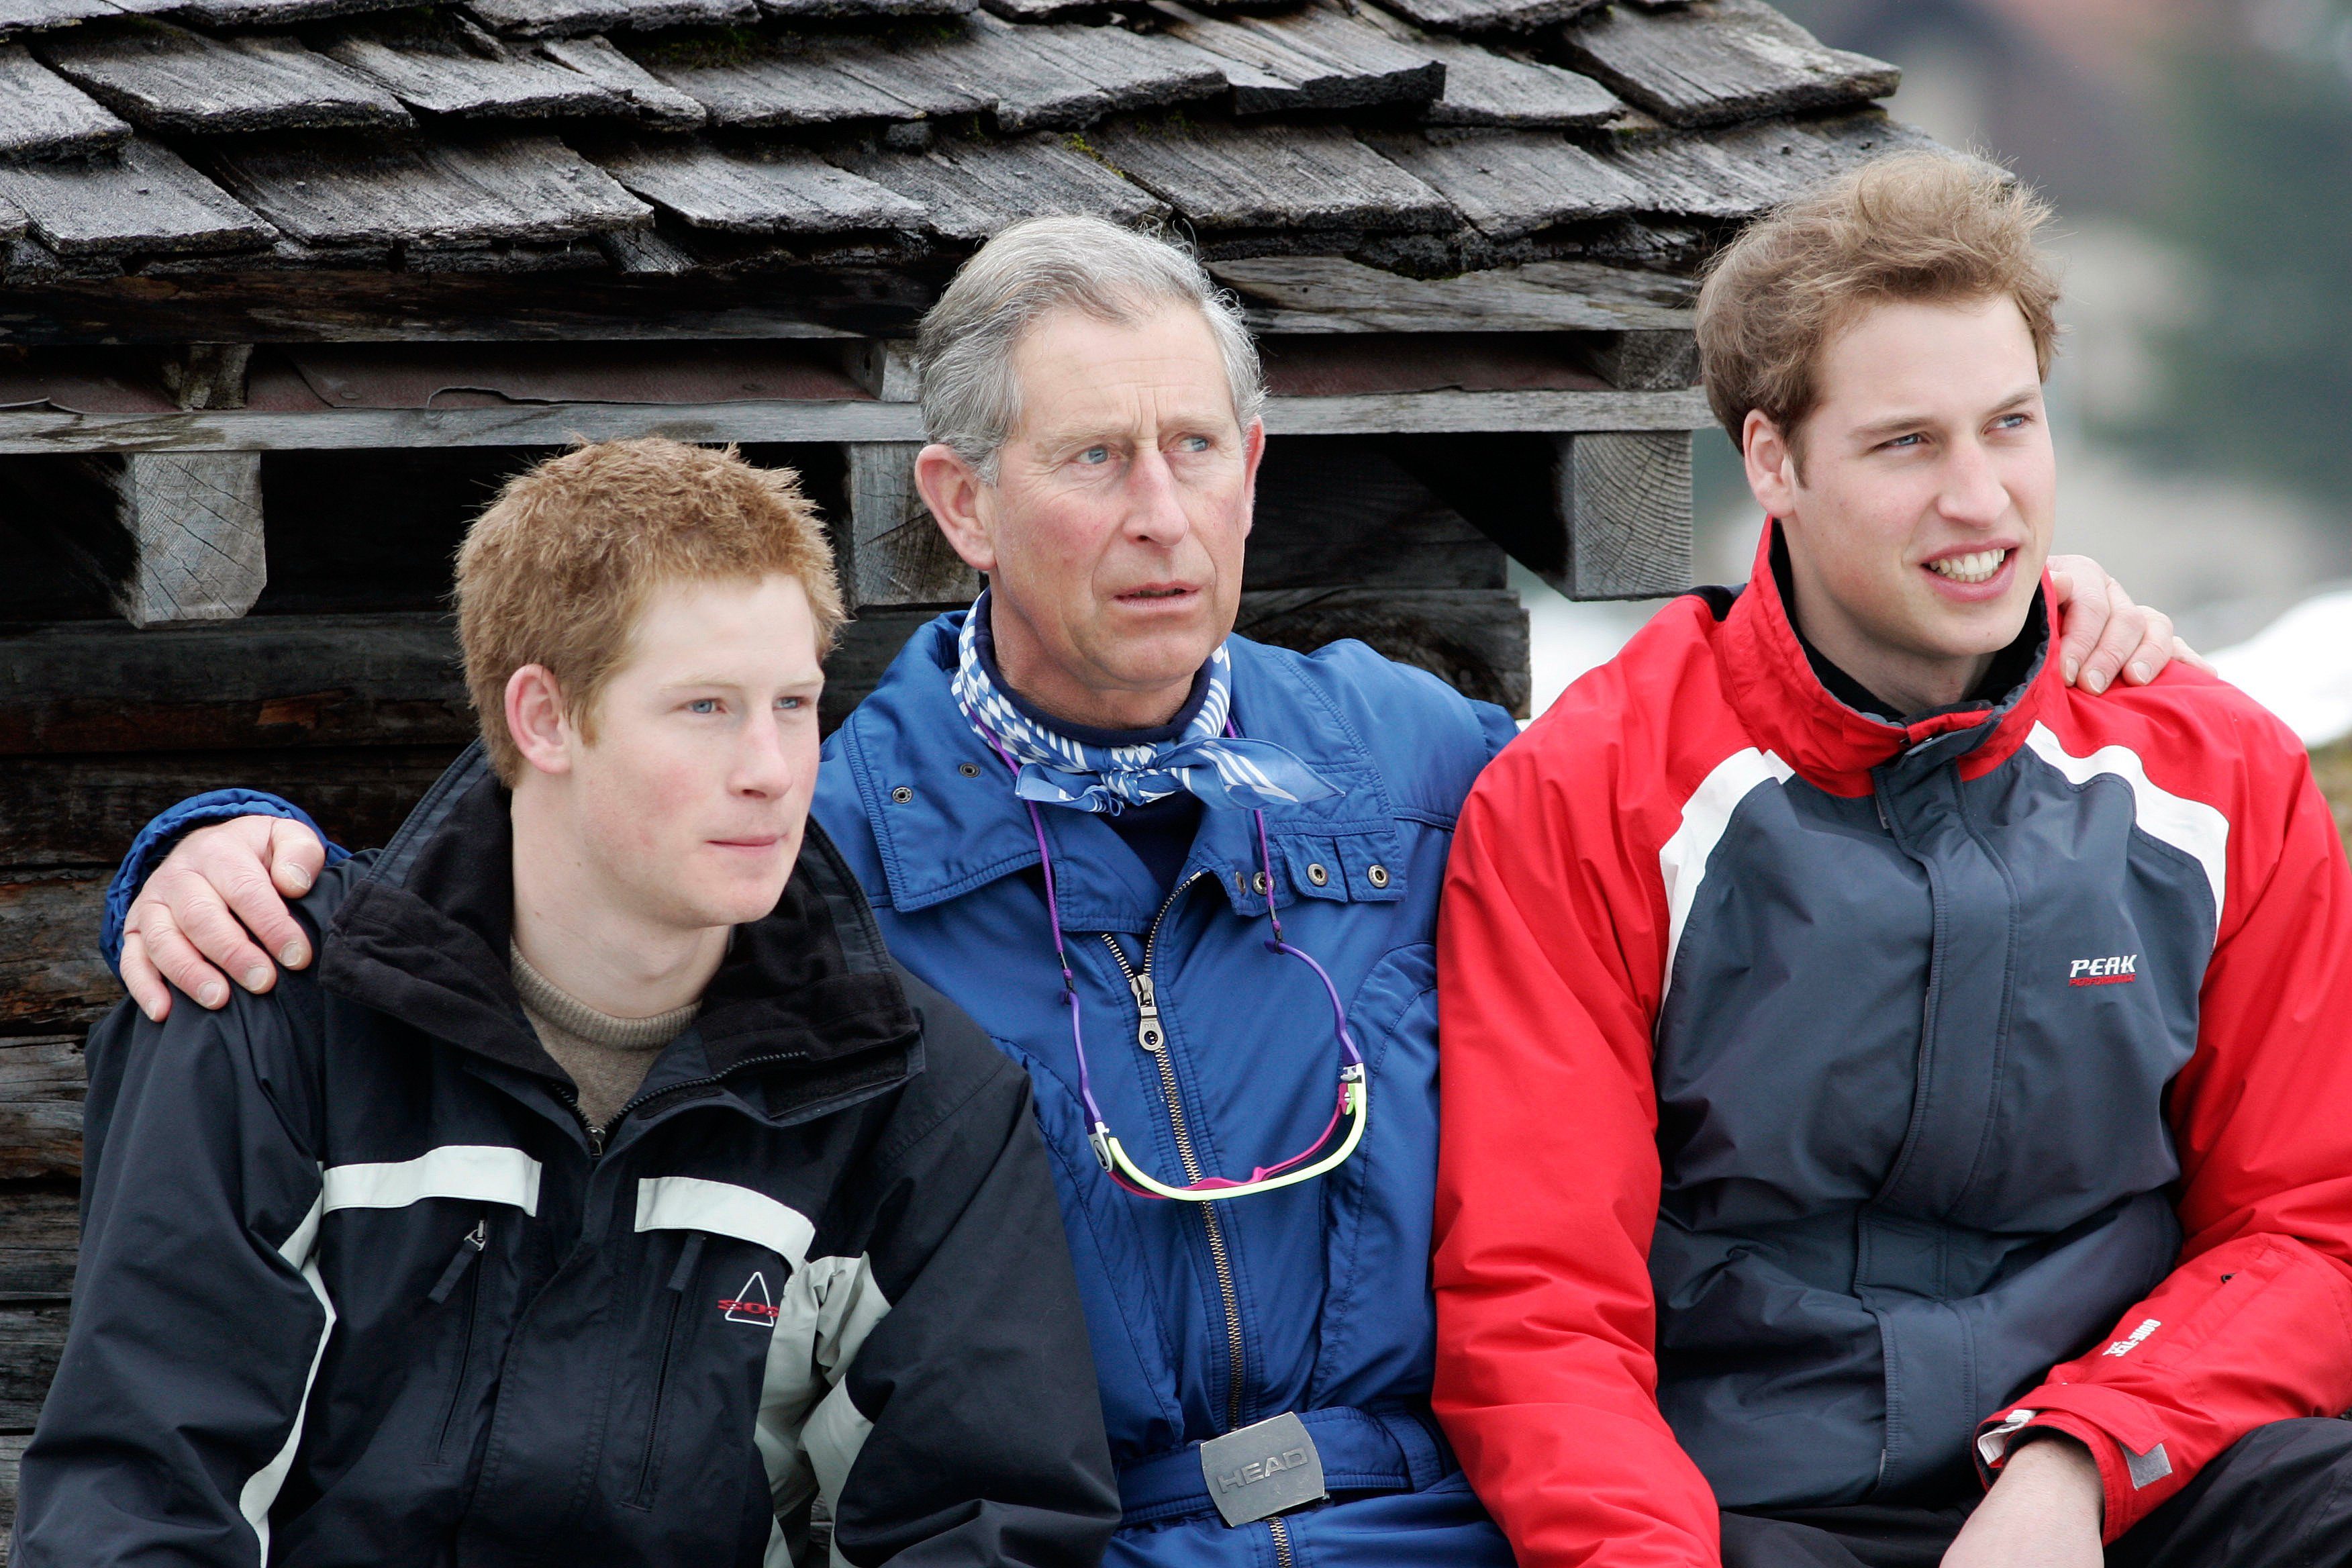 Prince Charles was overheard muttering criticism for the press during a photocall with Prince William and Prince Harry 